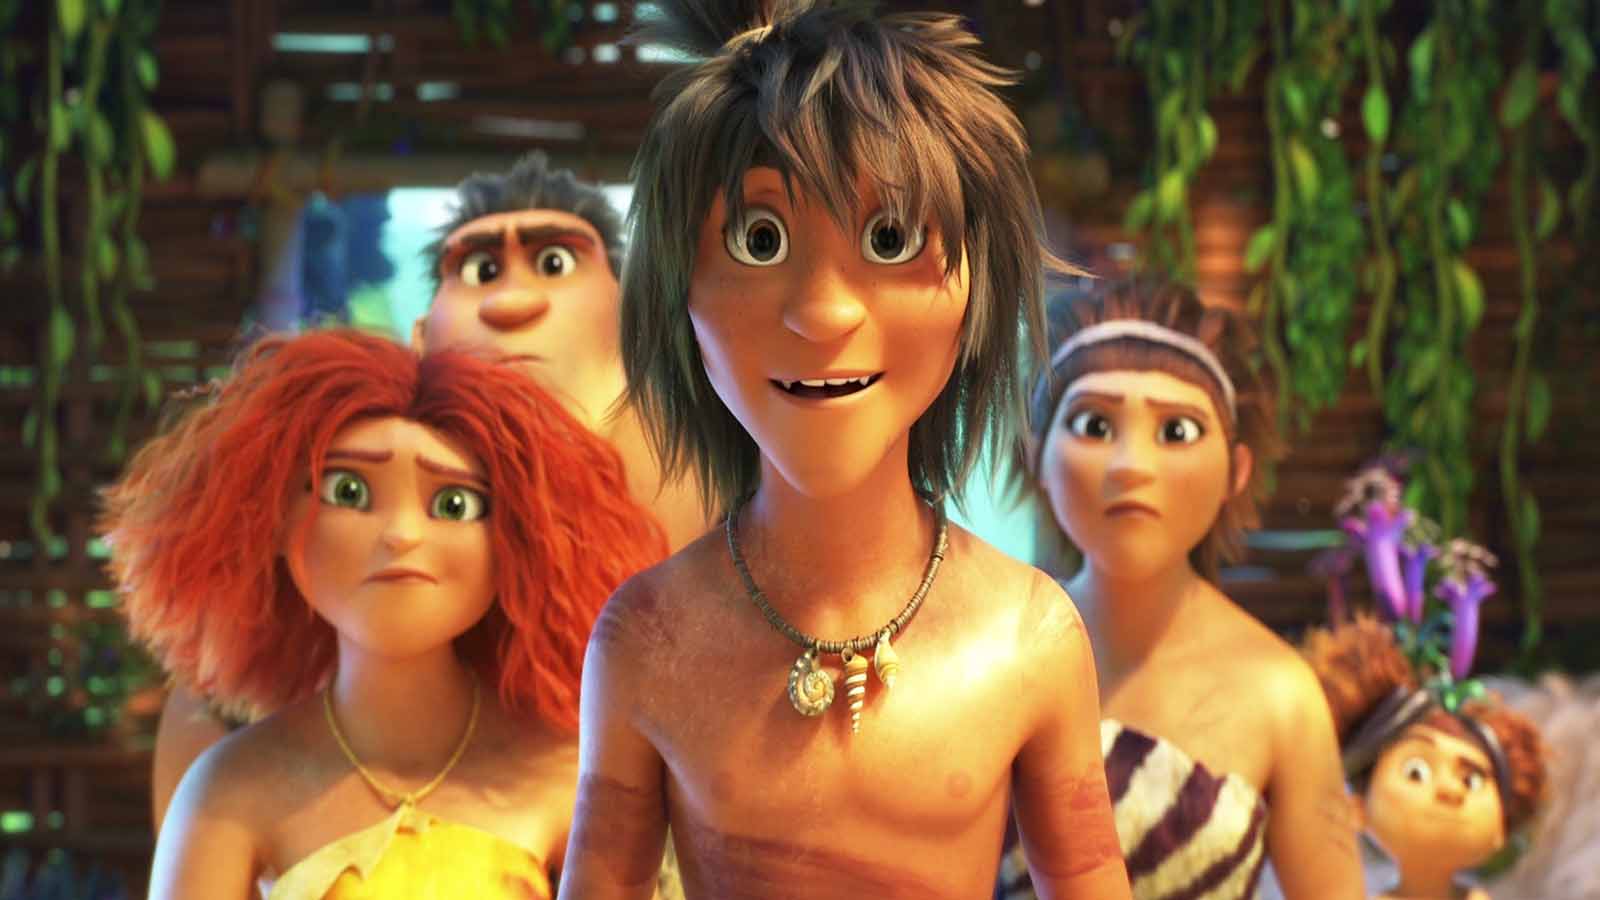 Want to check out 'The Croods 2: A New Age'? Here's where you can watch the full movie online for free.